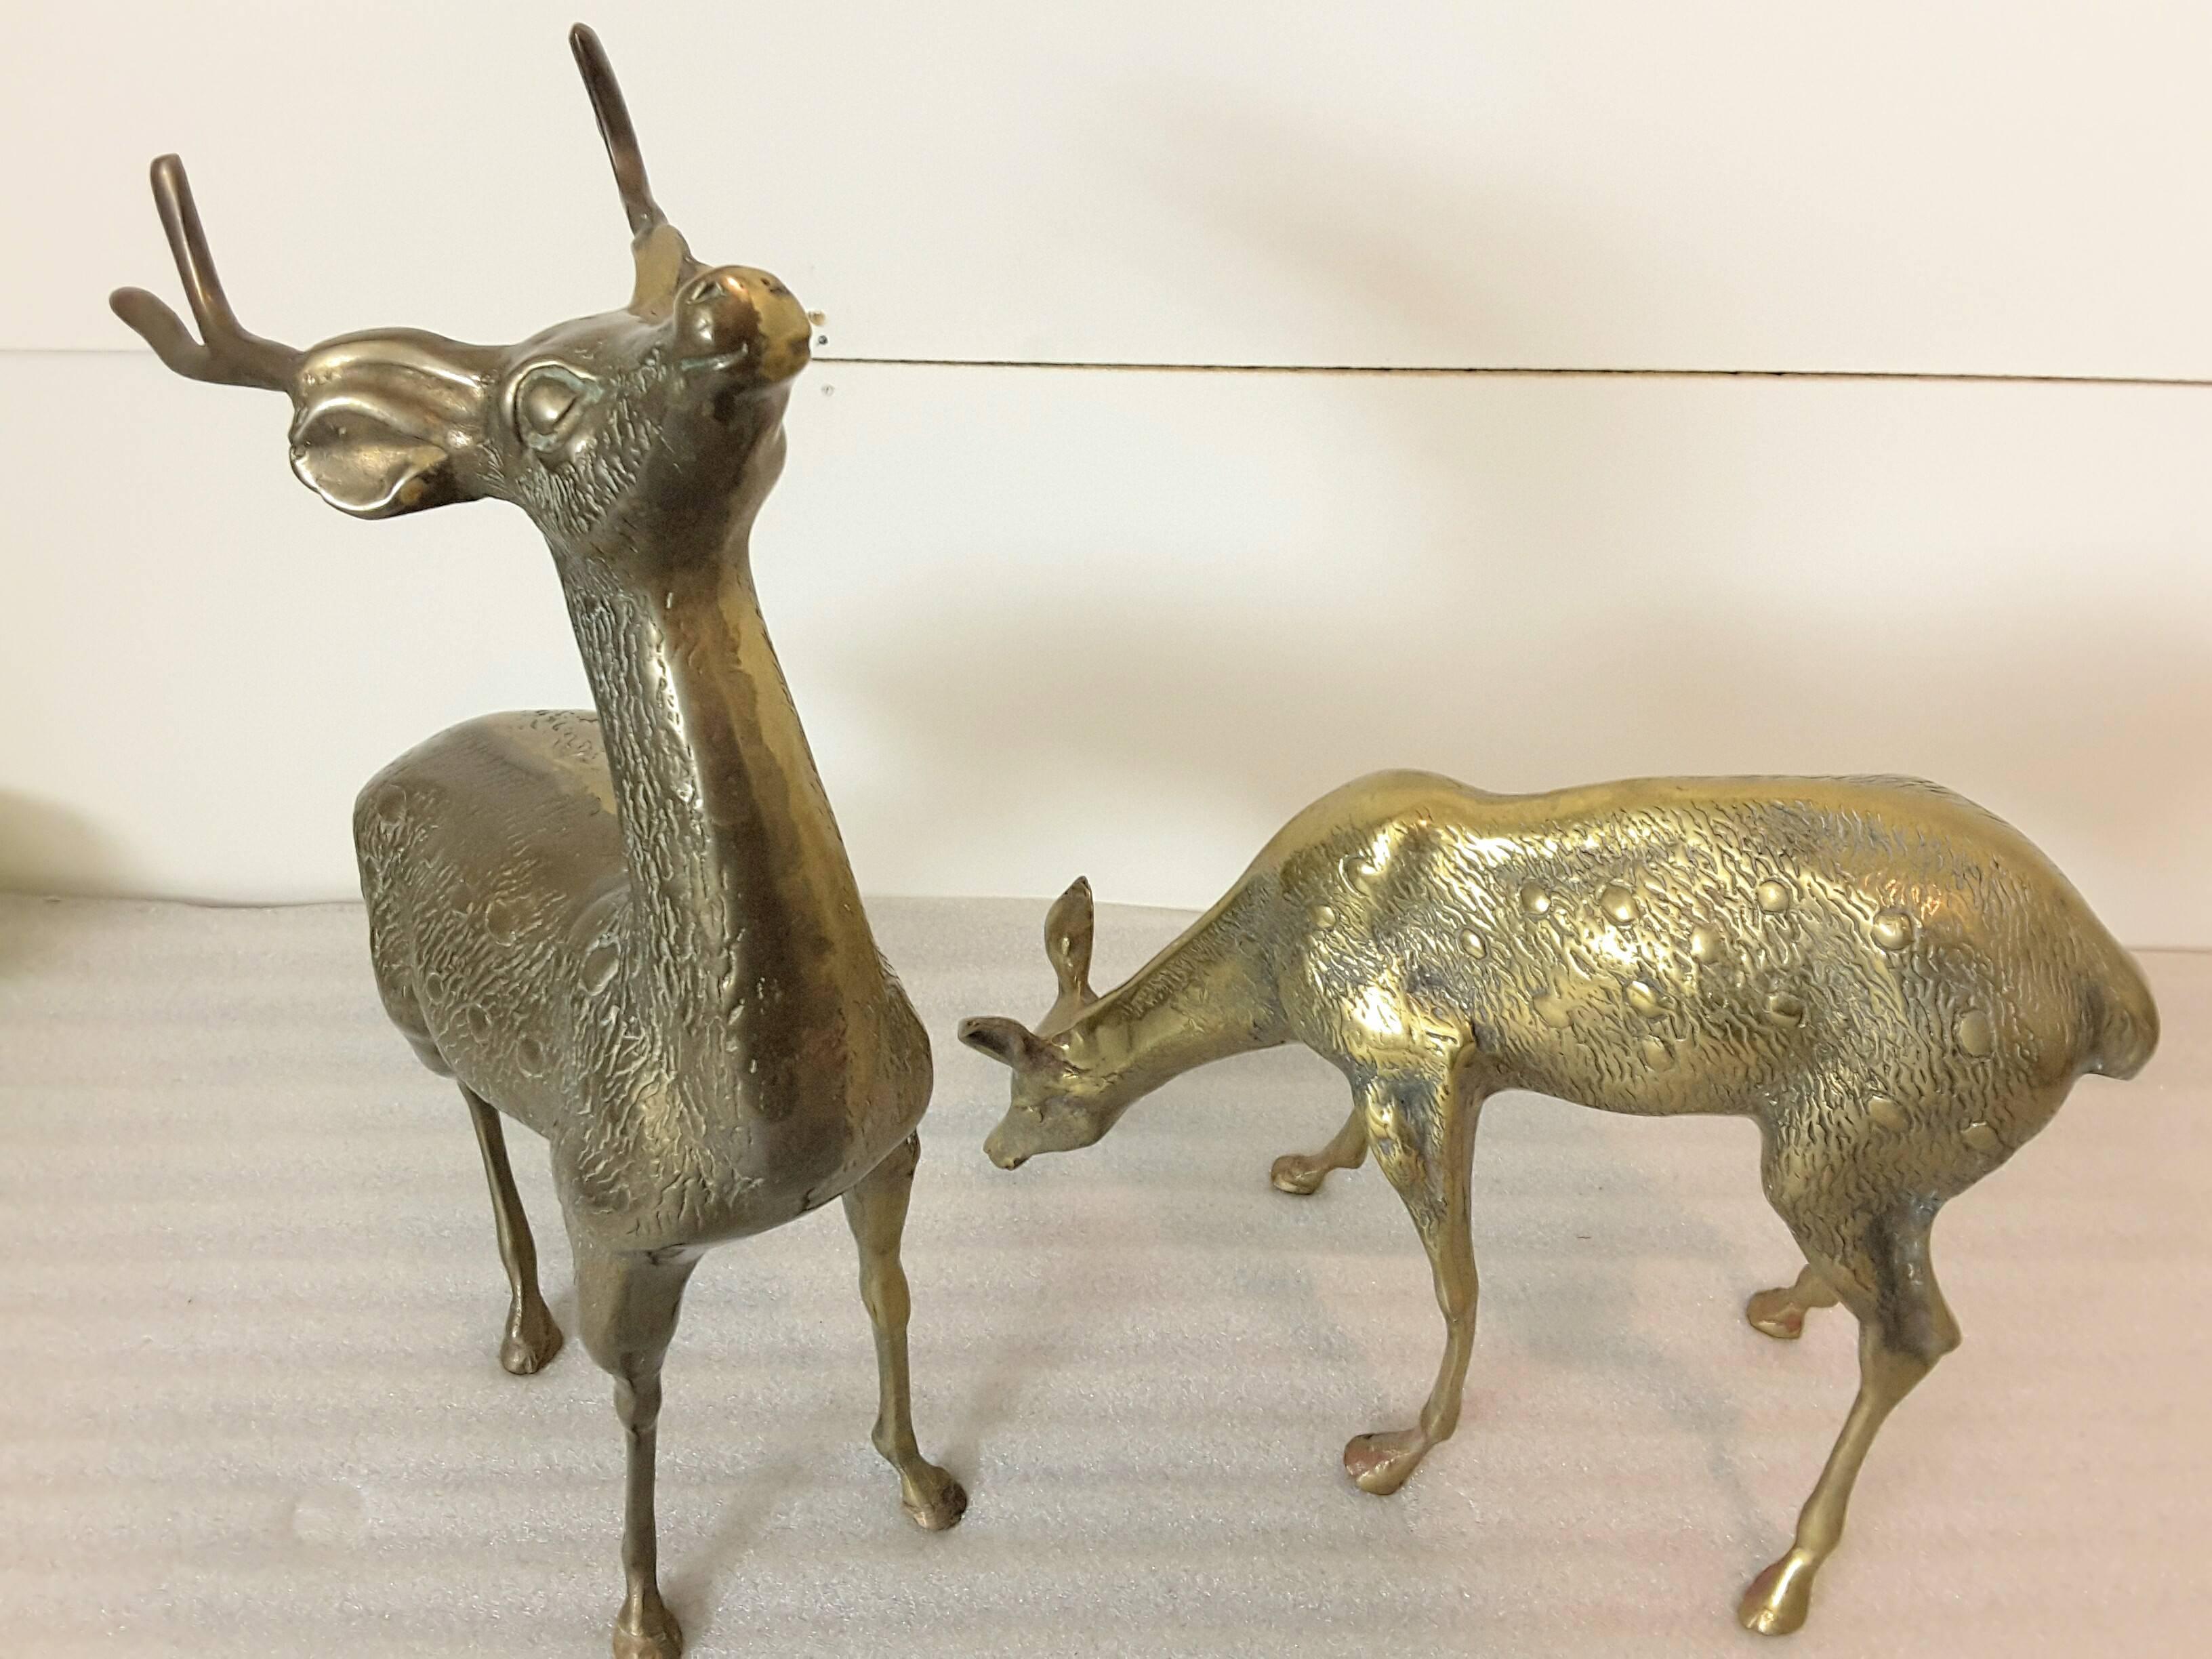 Mid-century brass guarding stag and feeding doe sculpture's, the deer are hollow cast solid brass and are nicely cast. The stag measures 14"-inches high x 9"-inches long x 4"-inches deep. The doe is 11"-inches high x